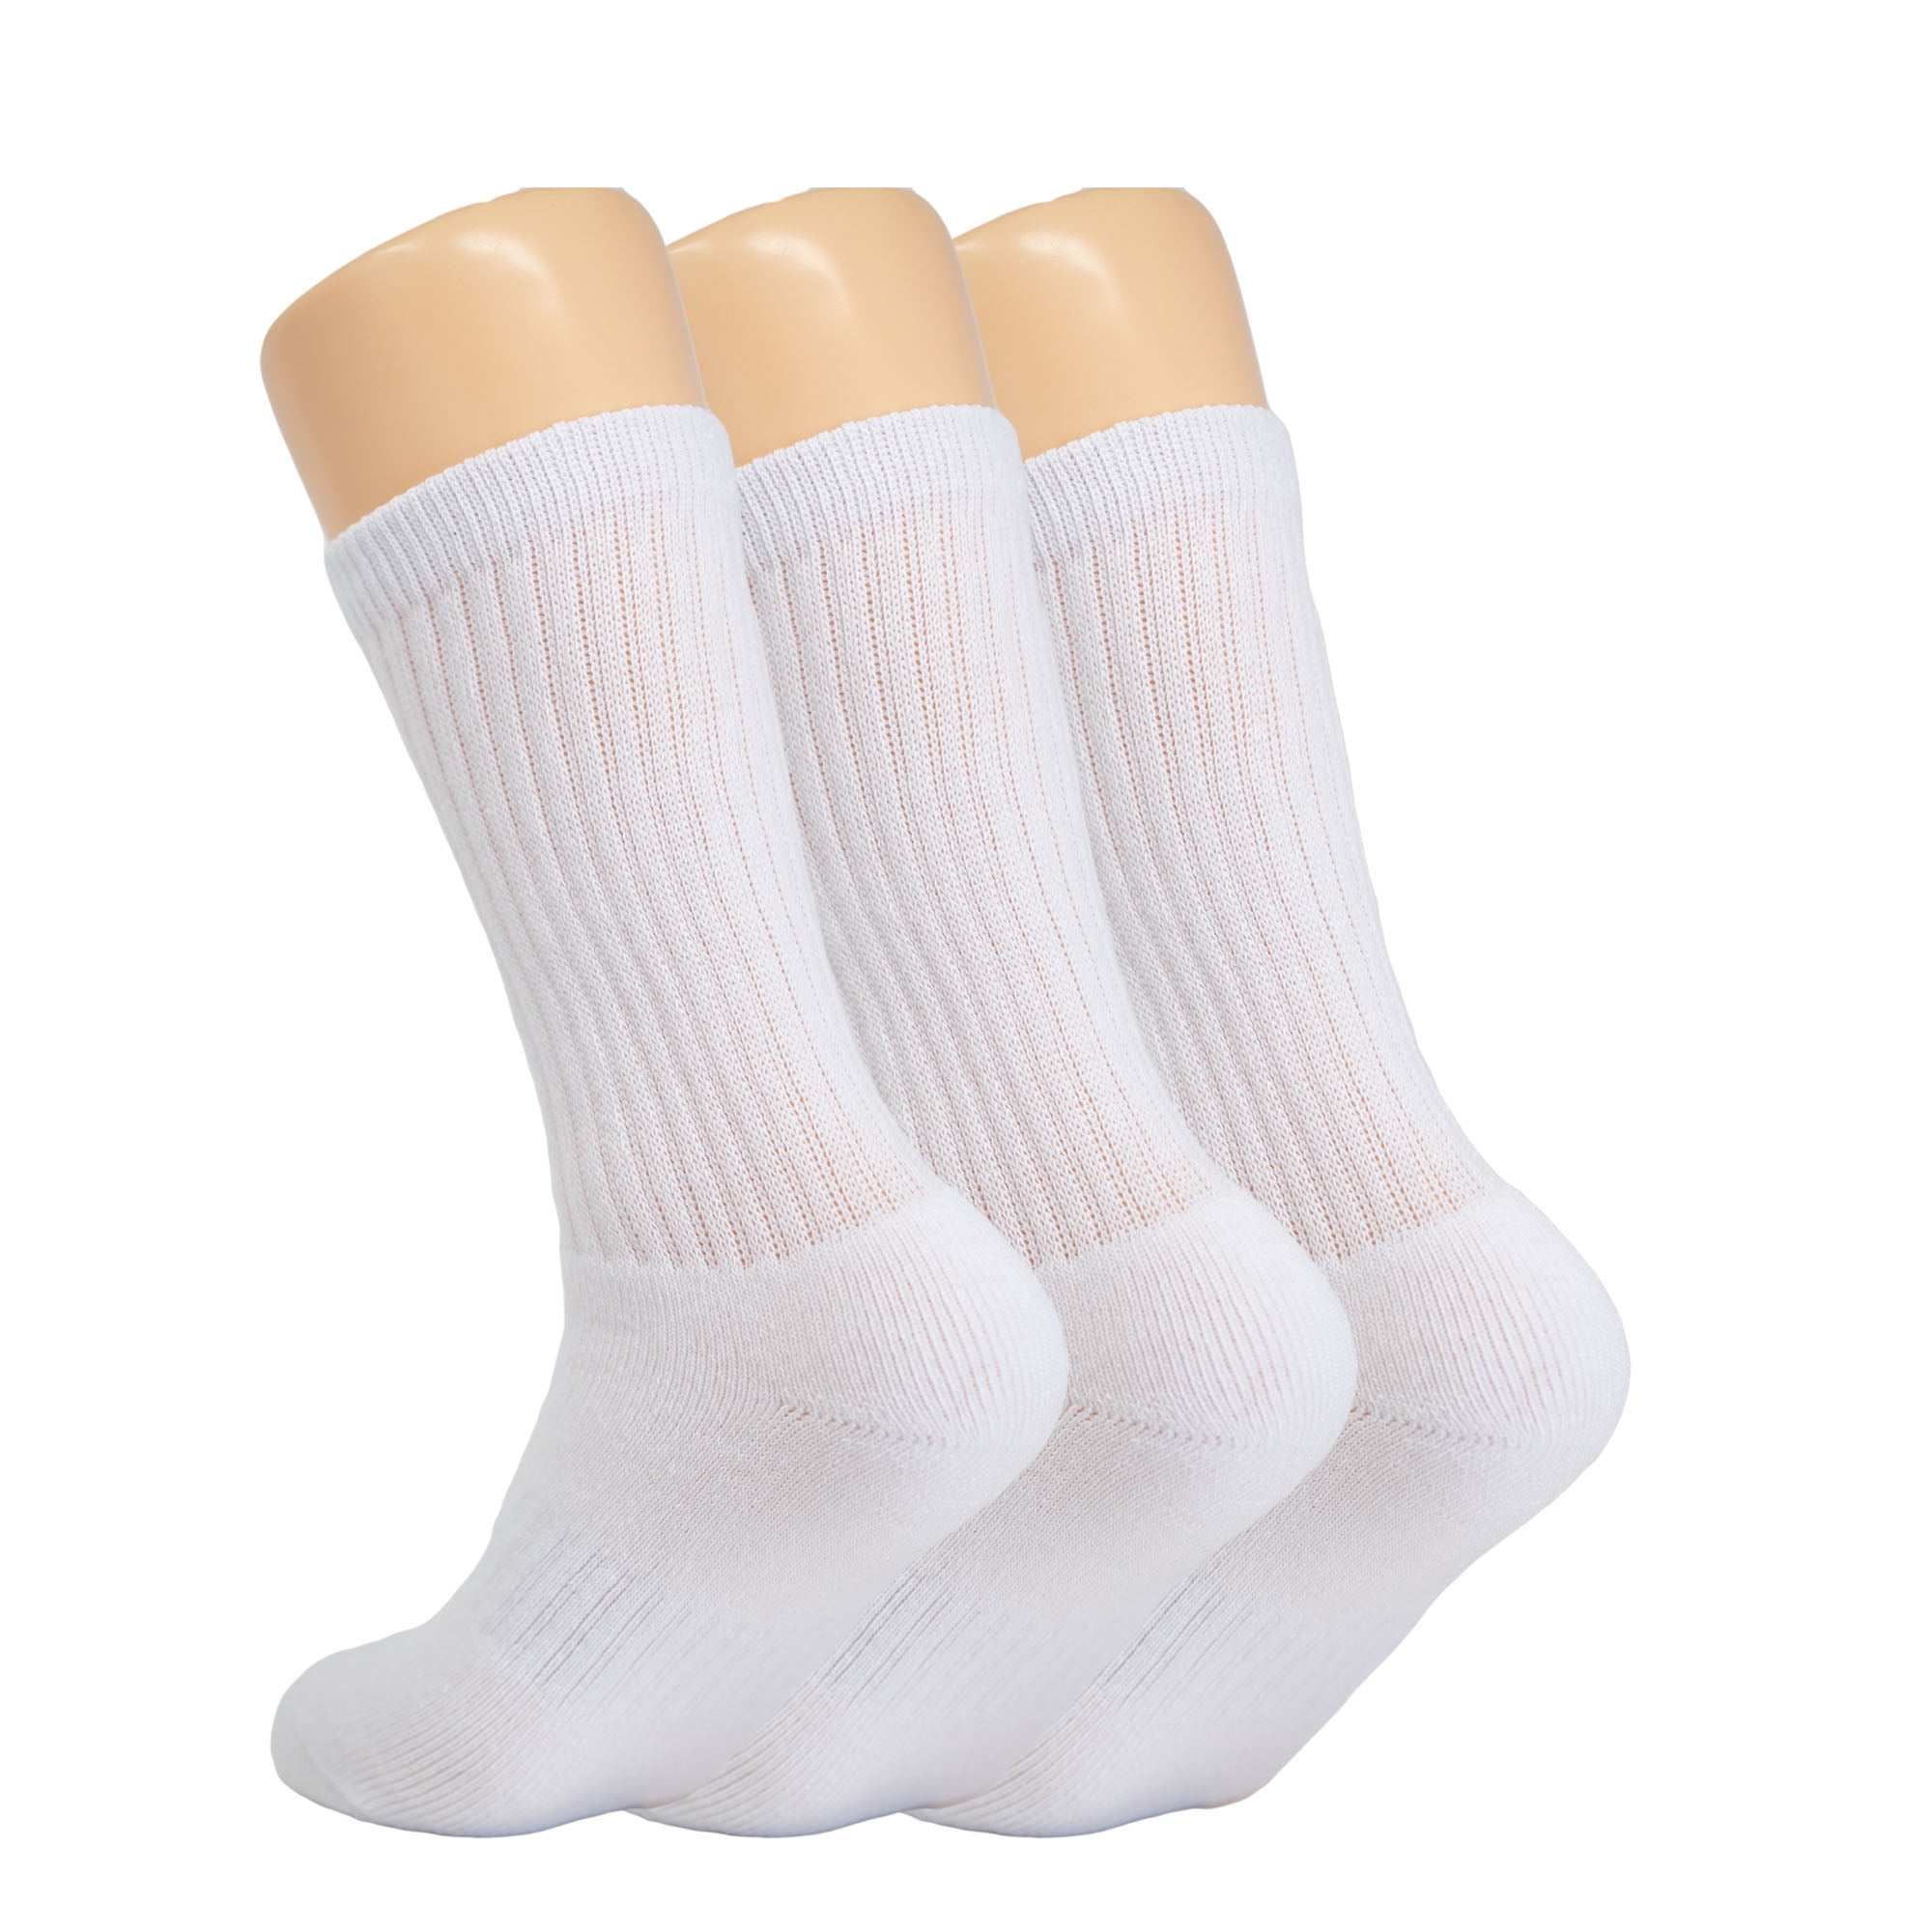 3 Pairs Mens White Solid Sports Athletic Work Crew Long Cotton Socks Size 9-11 